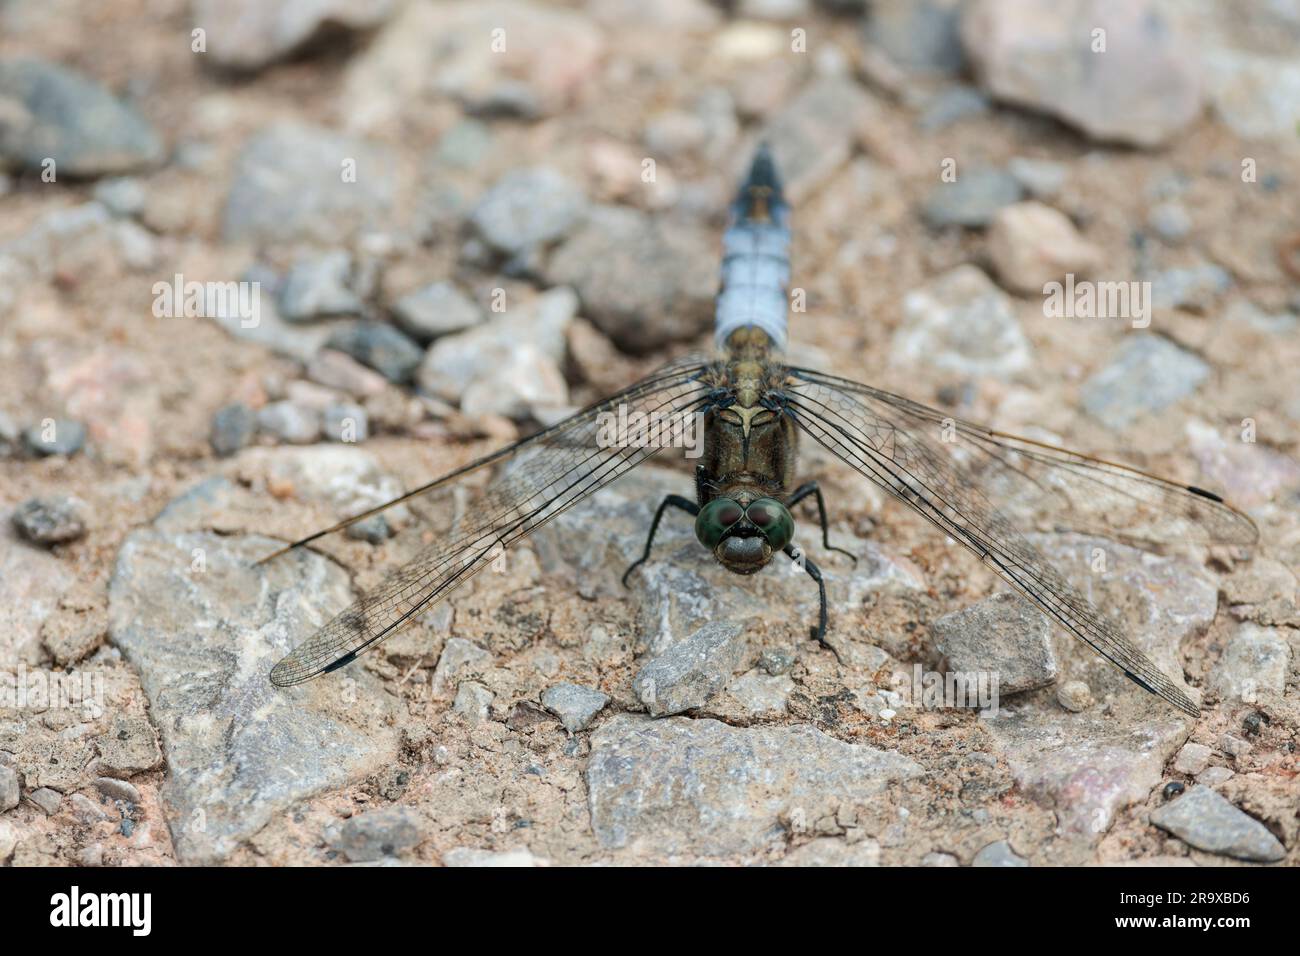 Black tailed skimmer Orthetrum cancellatum, Male dragonfly with blue tapering abdomen that darkens near the tip libelllulidae family has clear wings Stock Photo